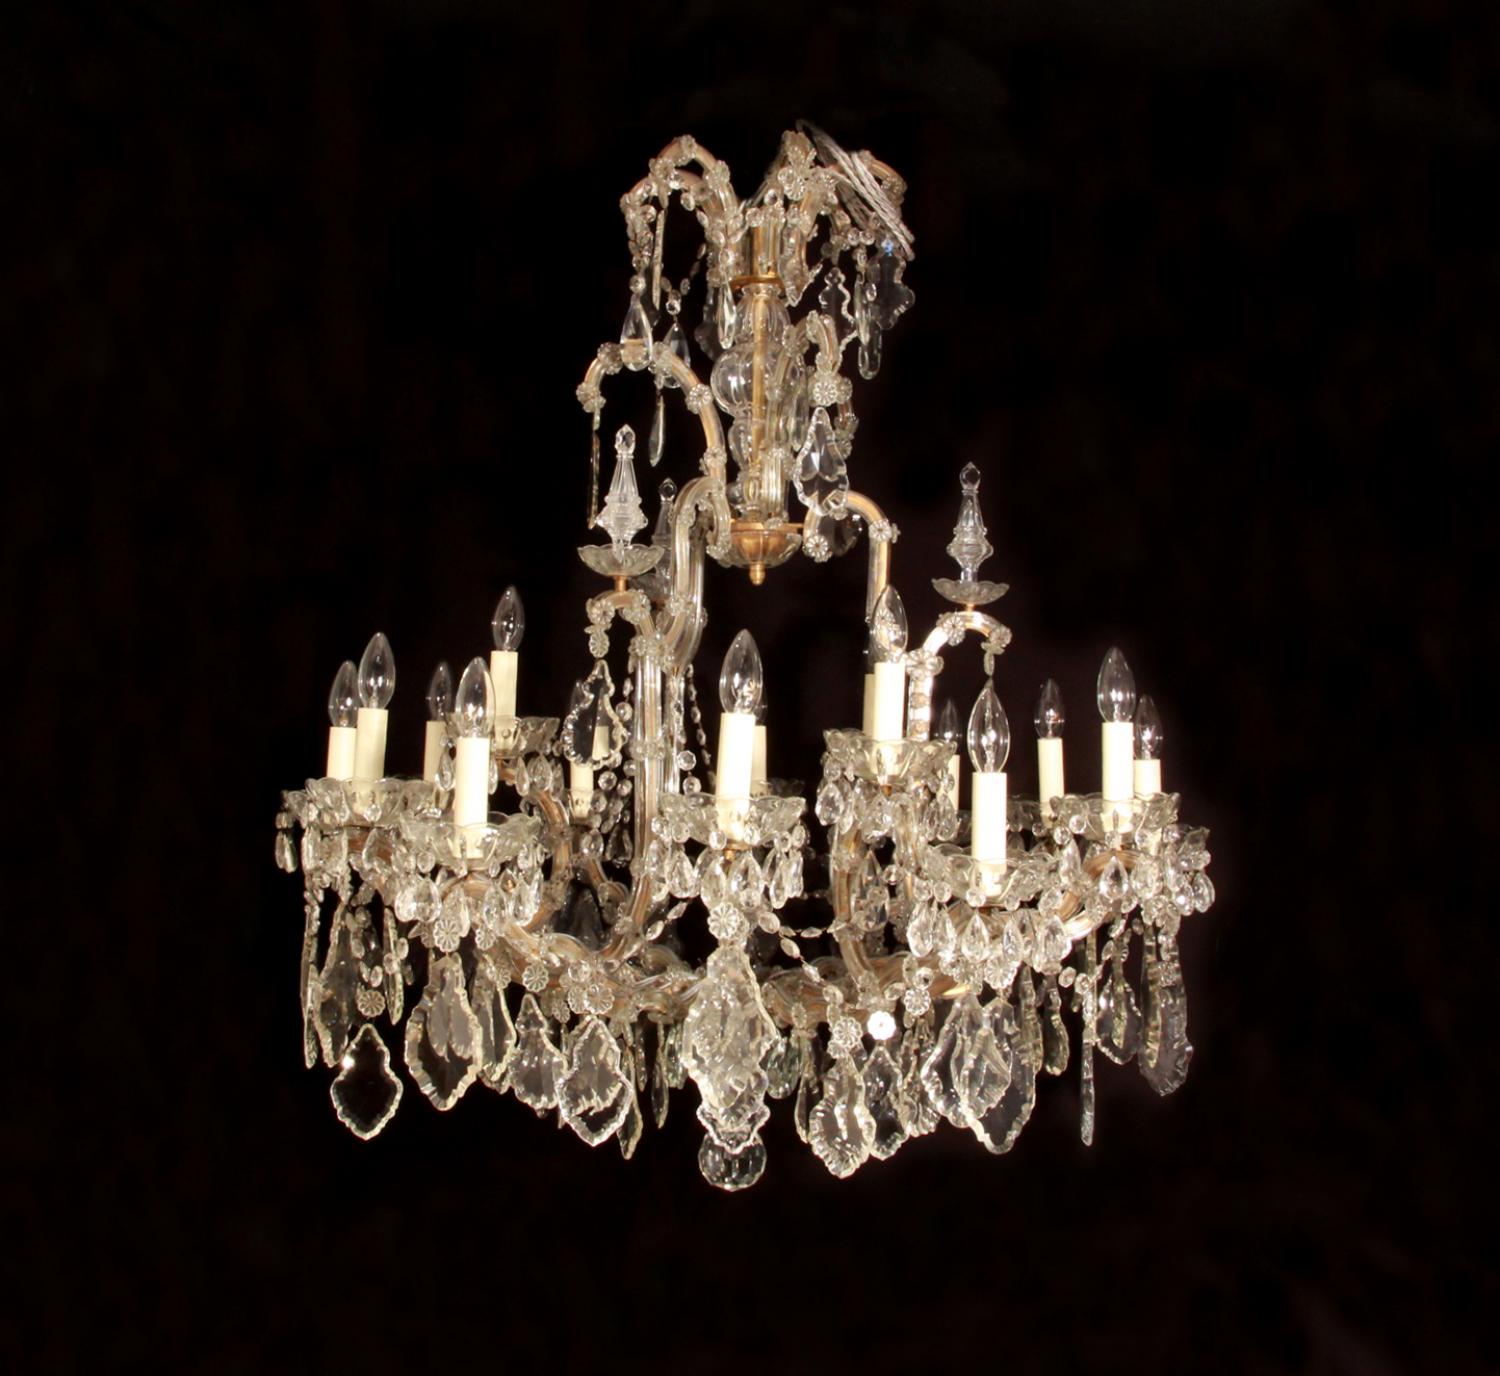 A Marie Therese style chandelier